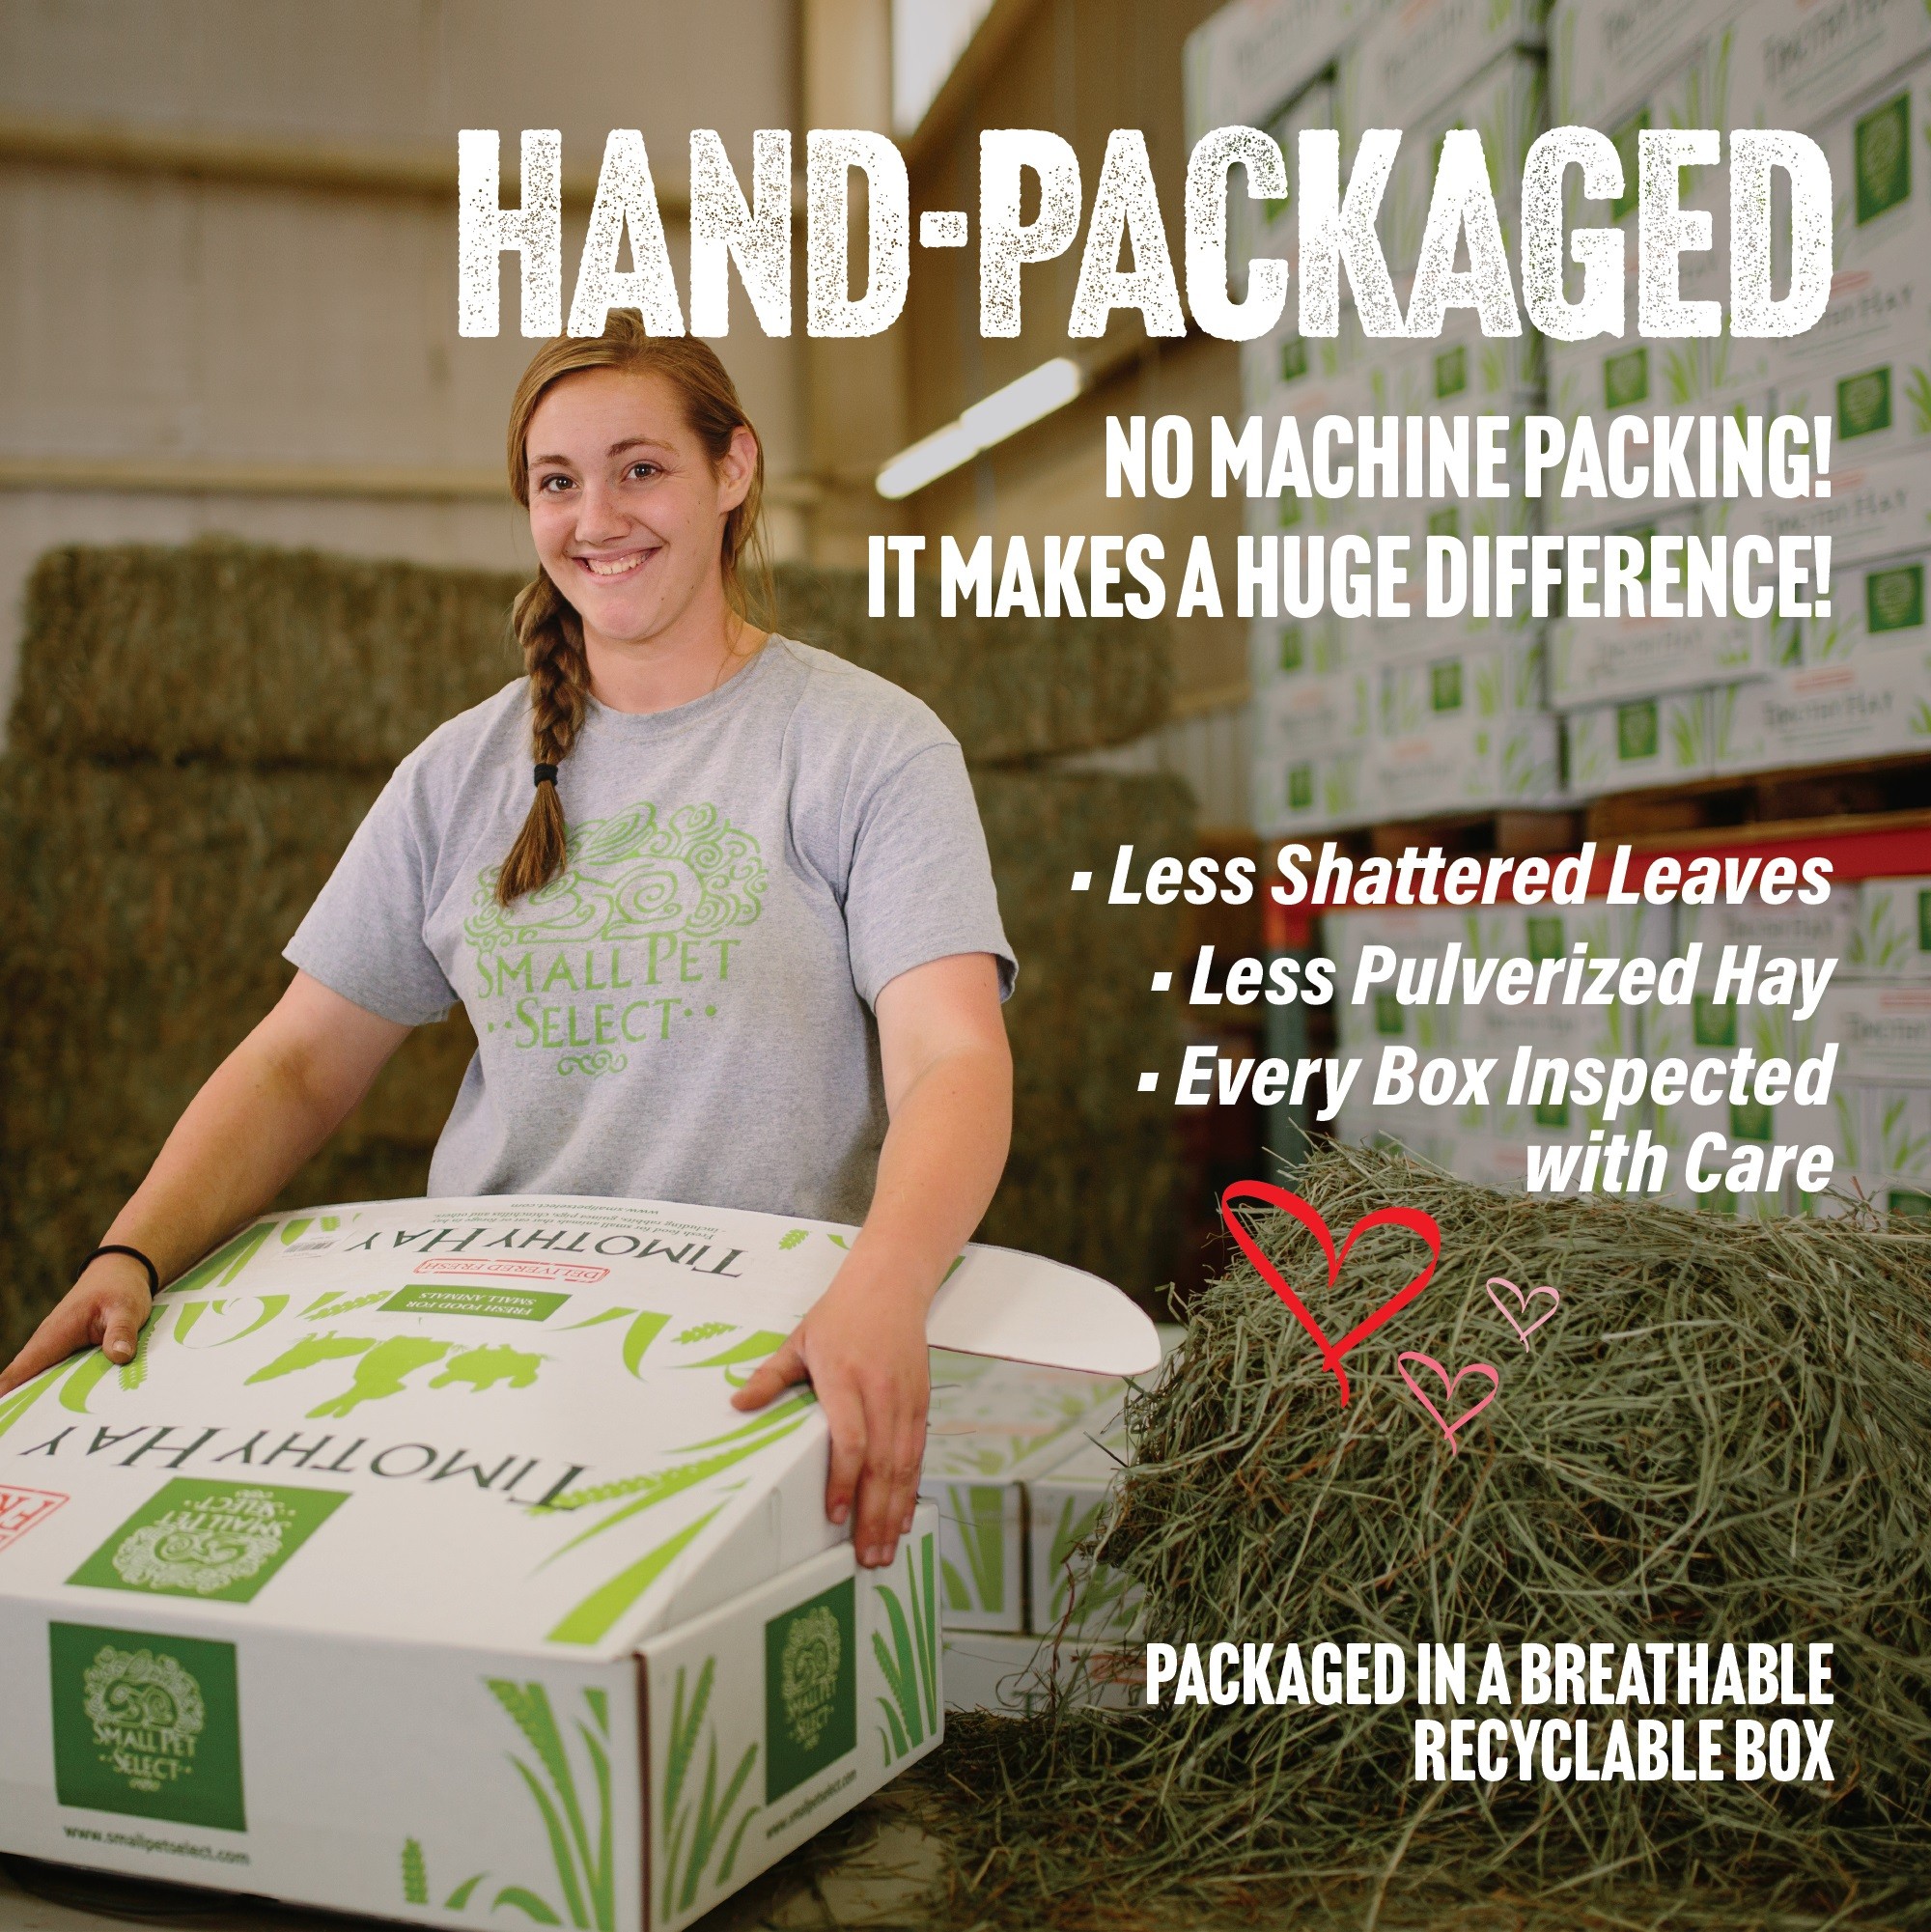 Small Pet Select hand packages all timothy hay